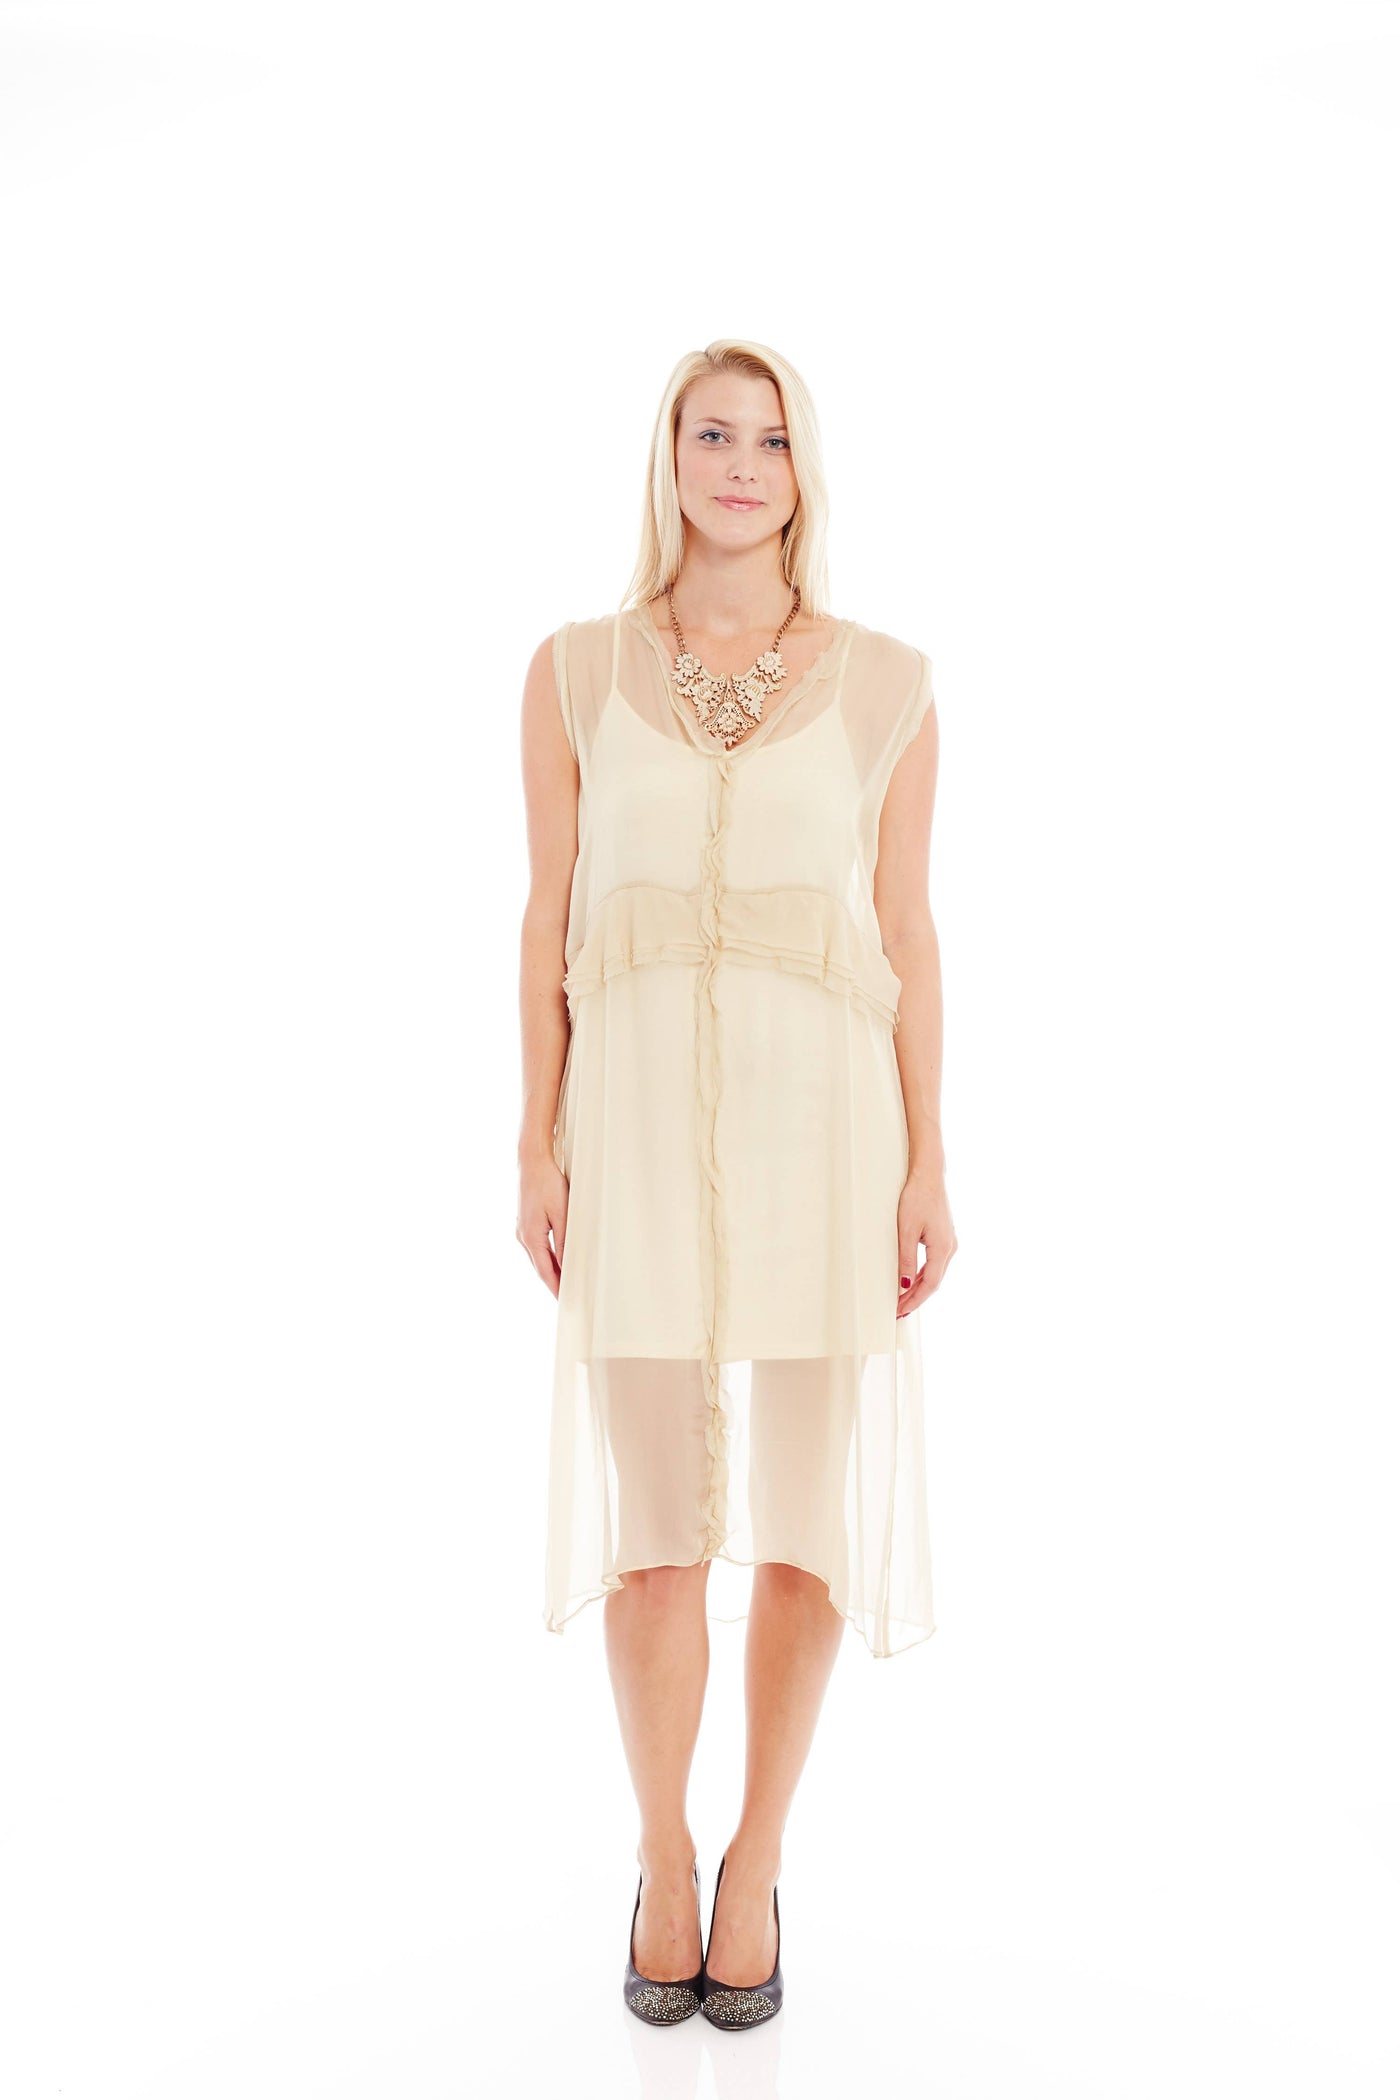 THE ELEVATE AFTER HOURS SILK DRESS IN CLASSIC OATMEAL